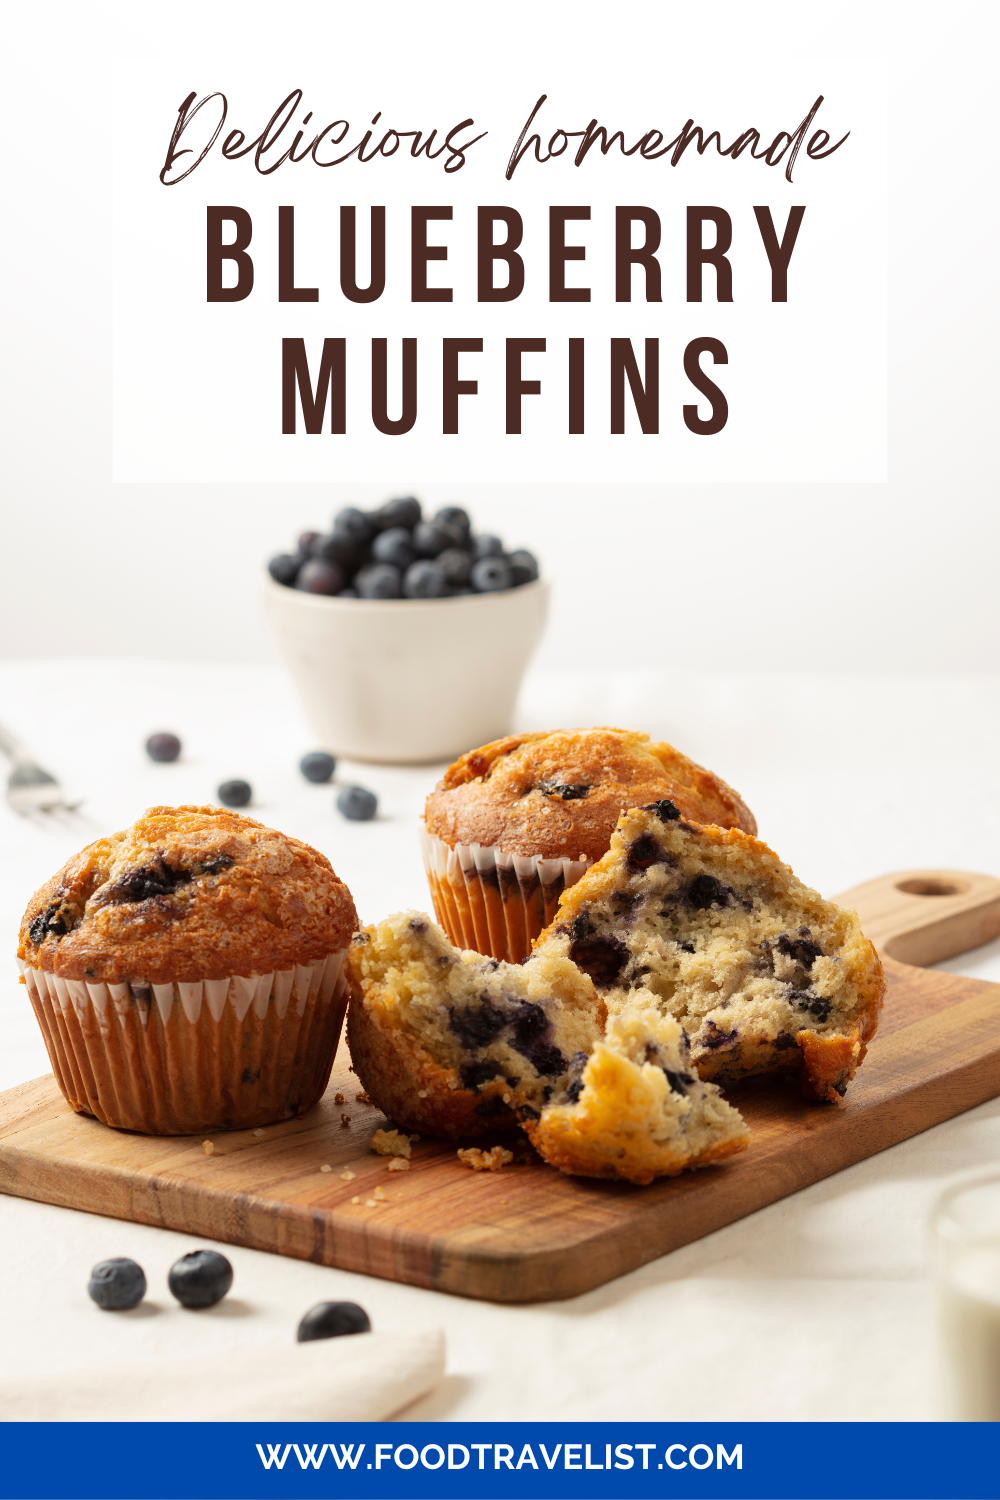 Blueberry muffin pin